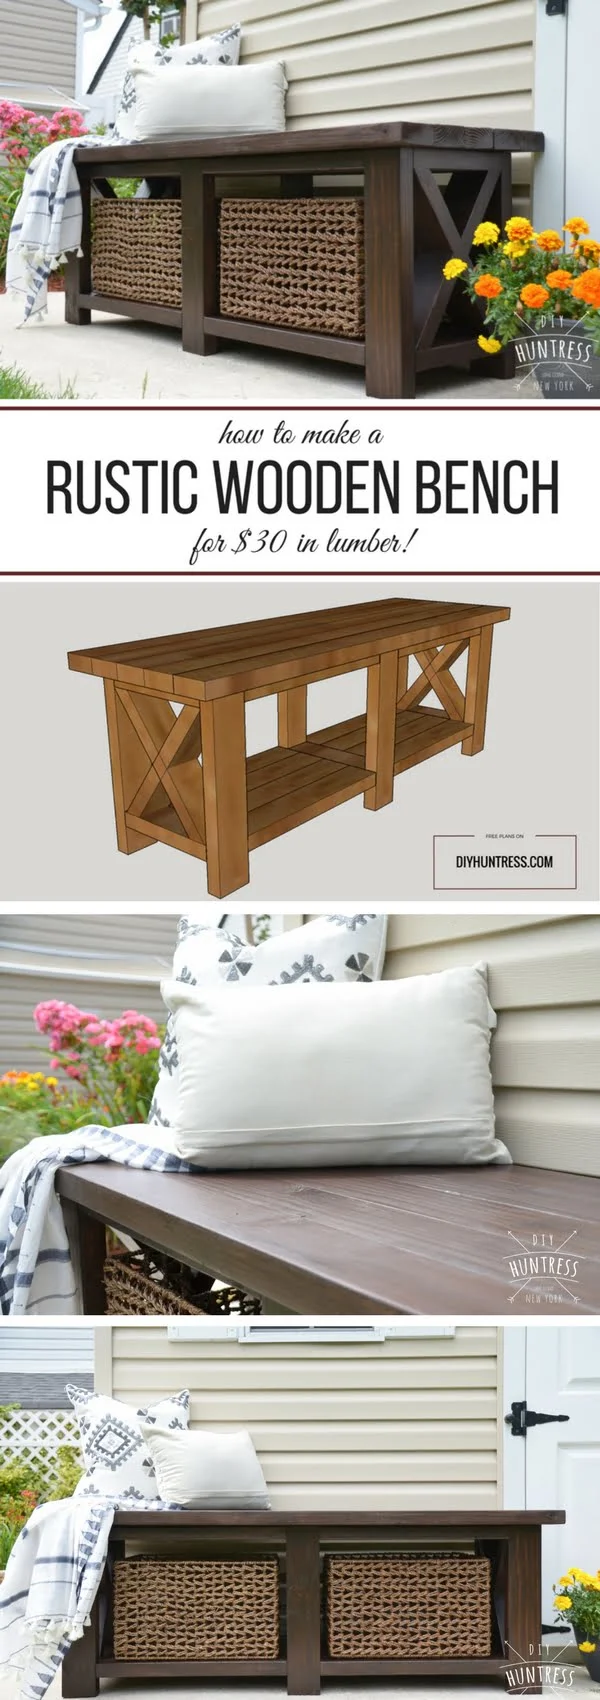 Check out the tutorial on how to make a DIY rustic bench